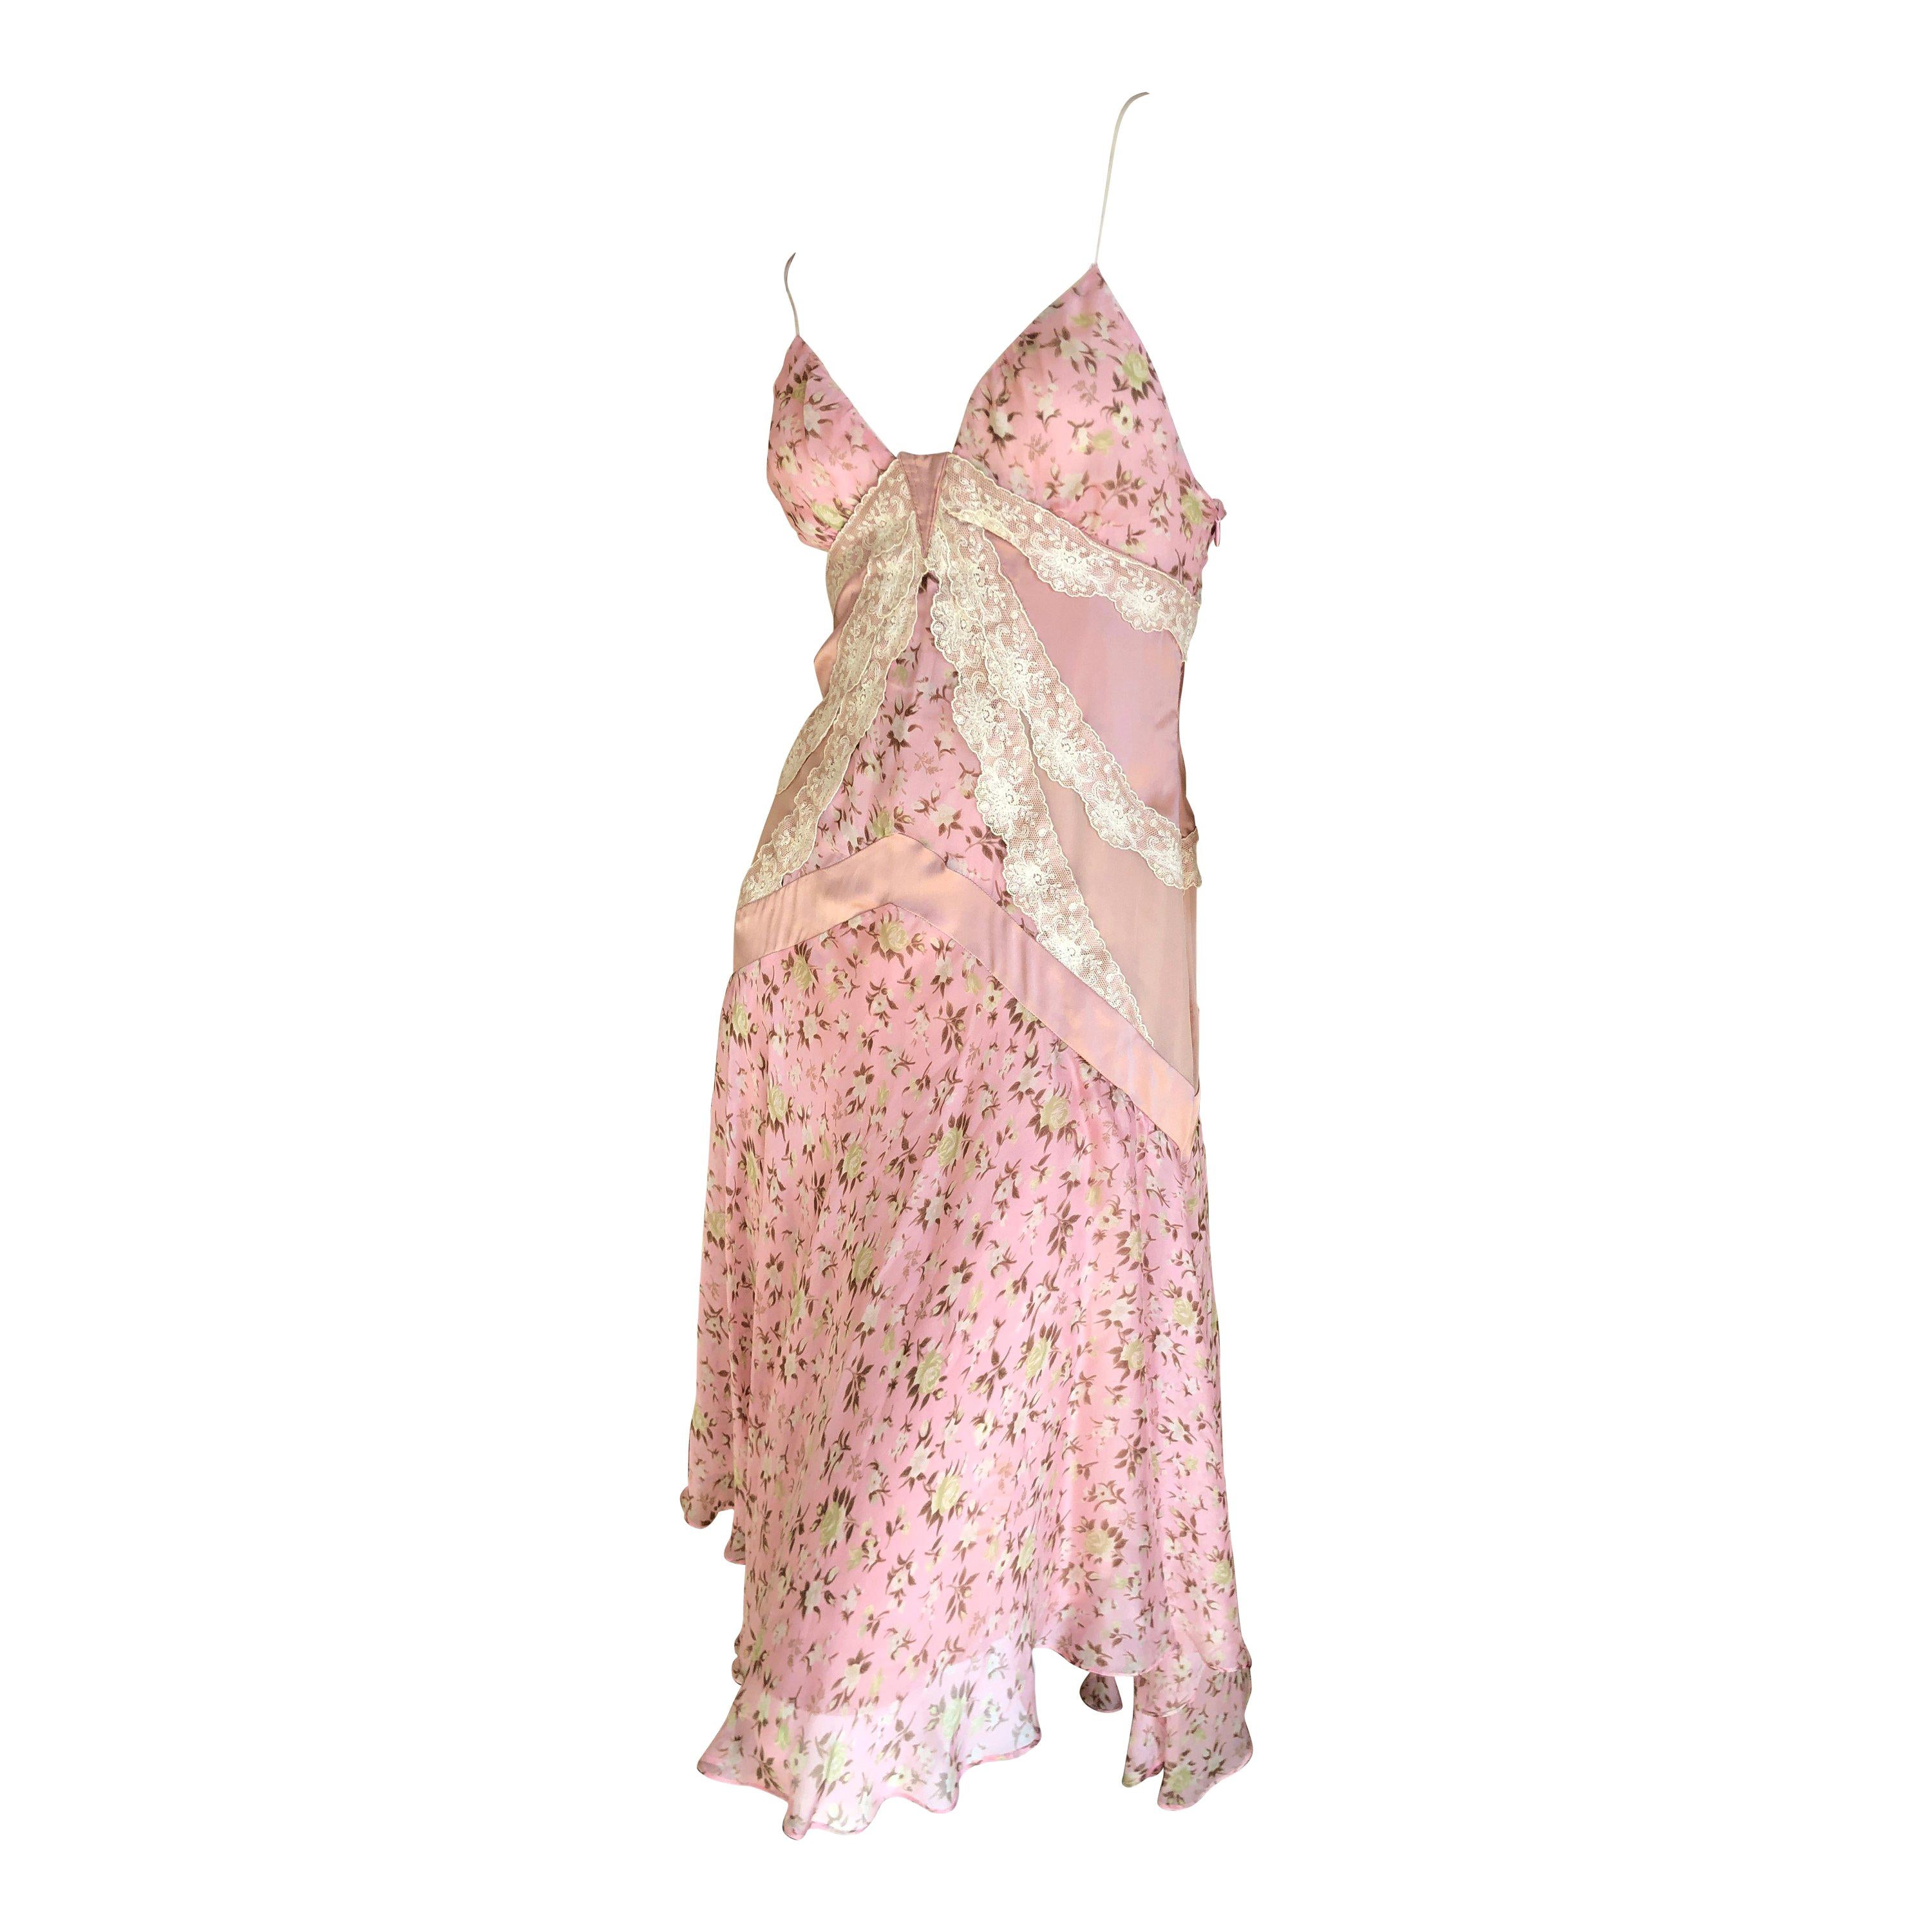 D&G Dolce & Gabbana Romantic Pink Silk Dress with Lace Details For Sale